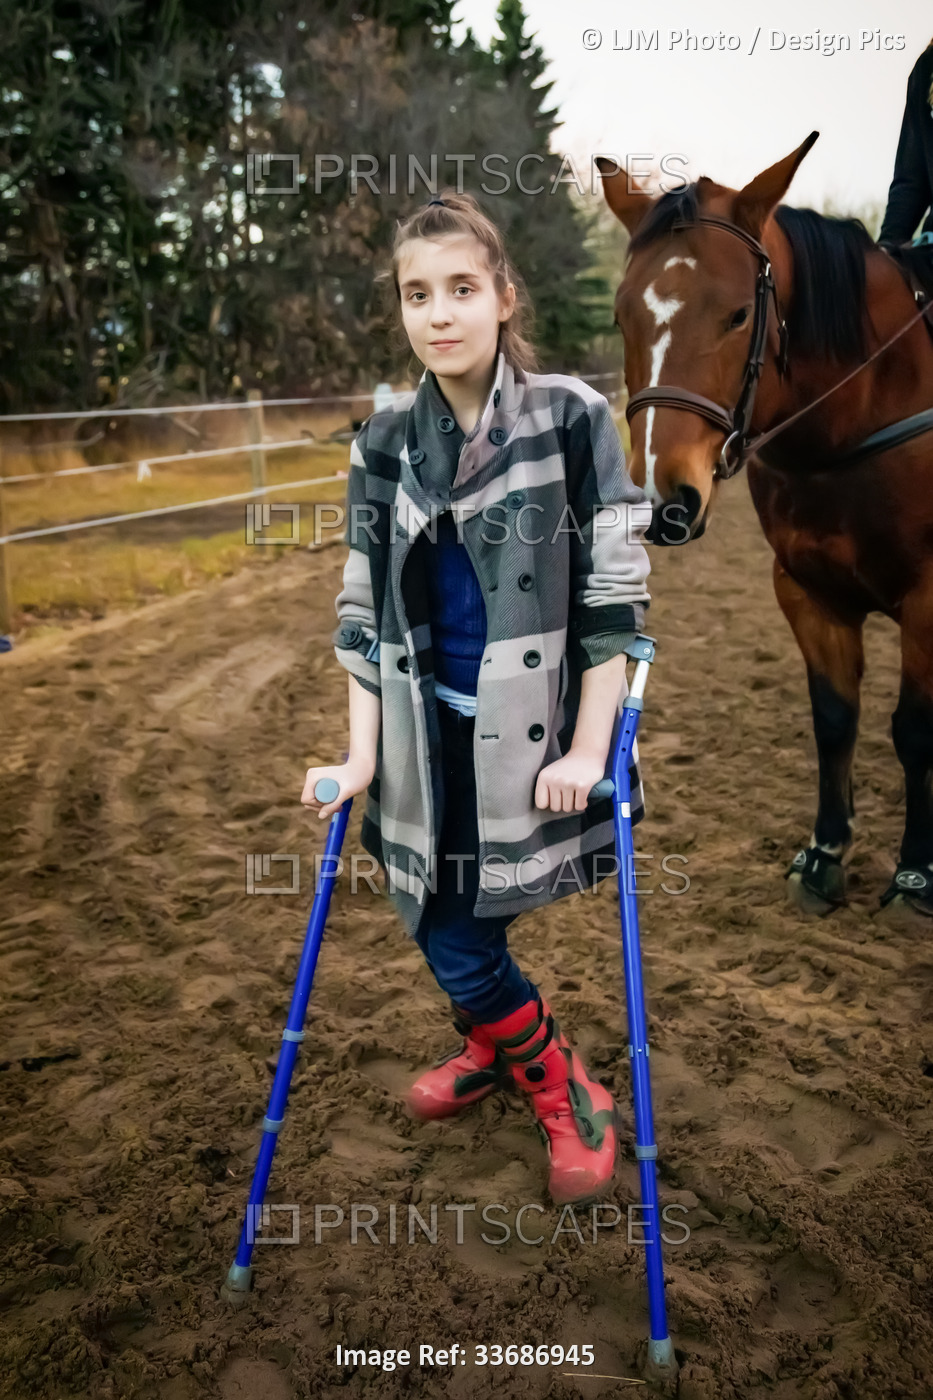 A young girl with Cerebral Palsy walking in a corral during a Hippotherapy ...